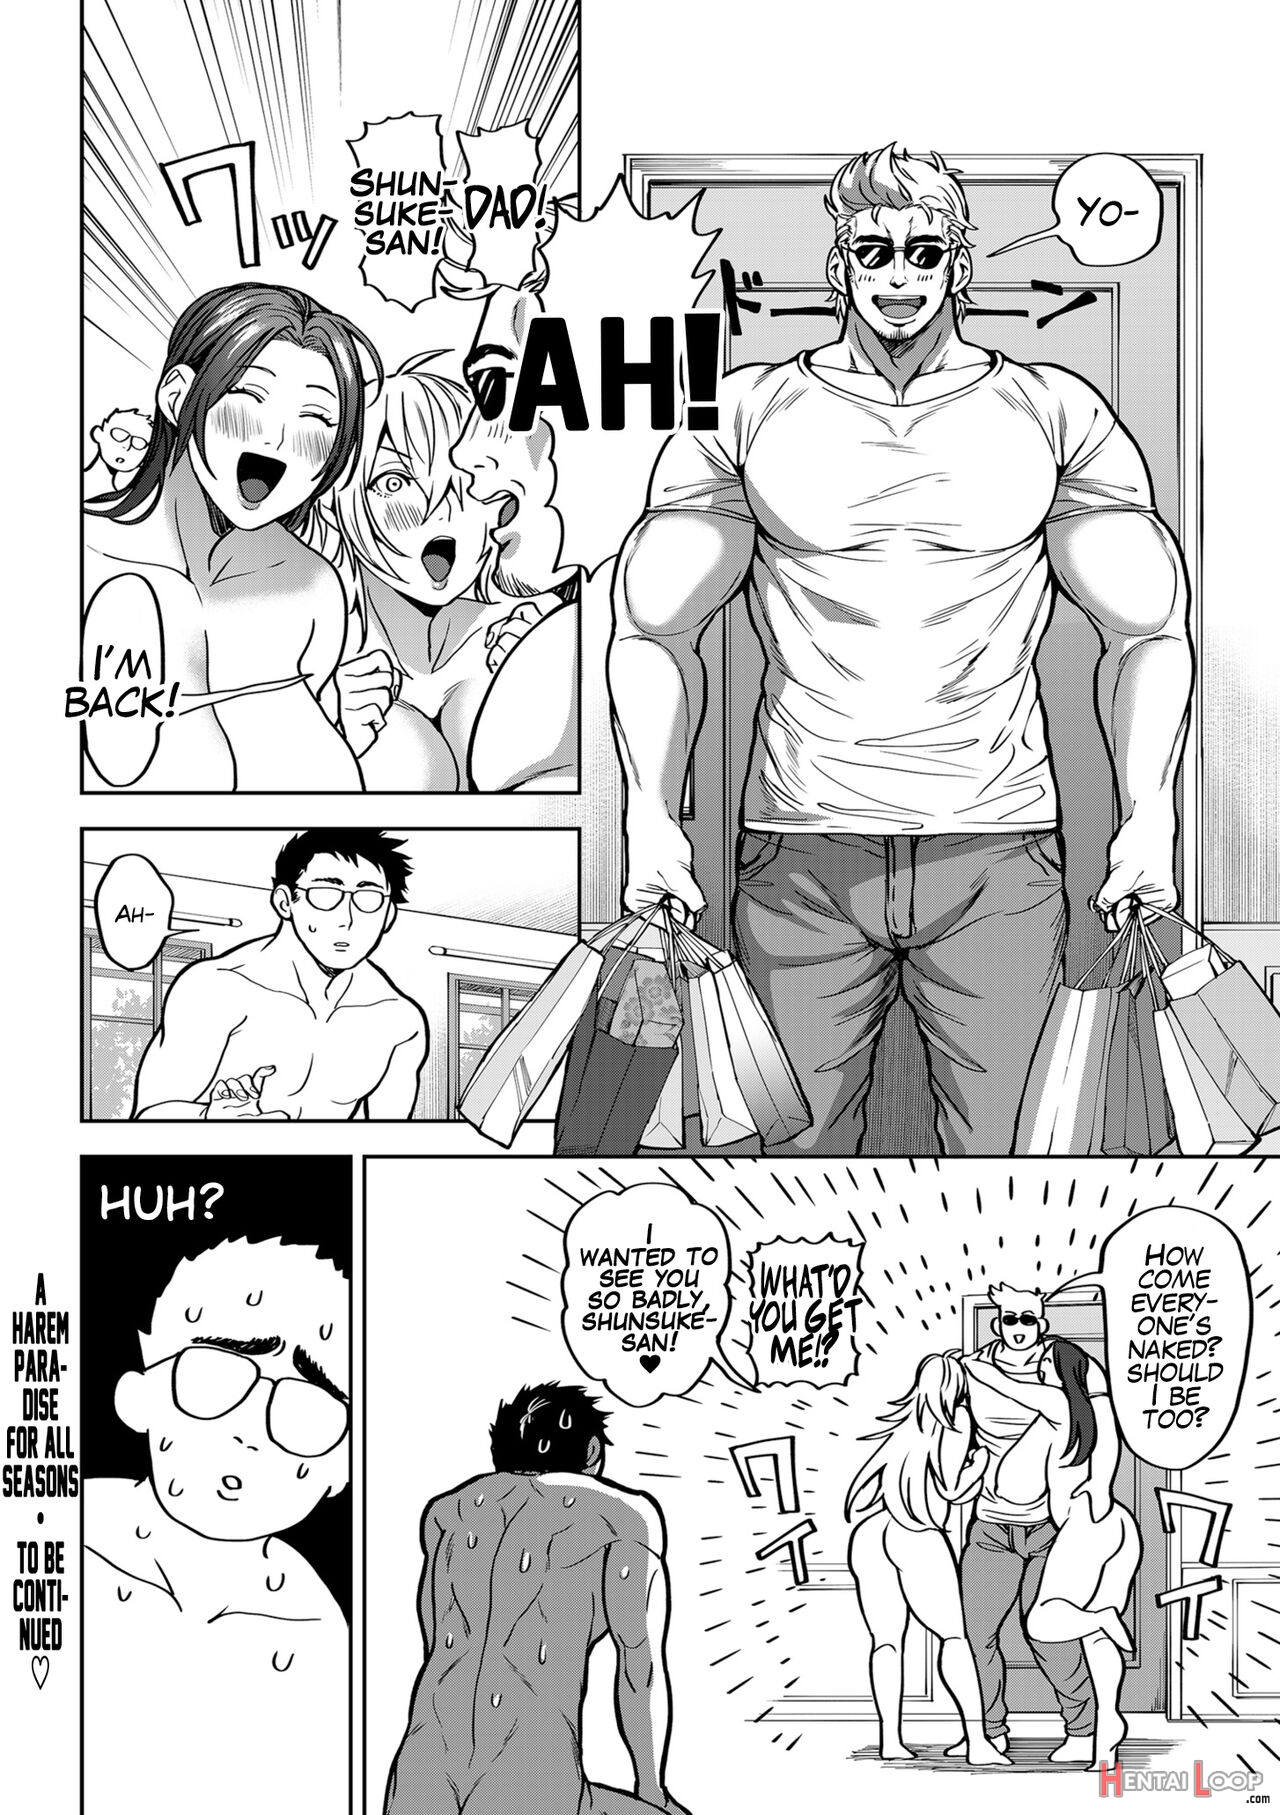 A Harem Paradise For All Seasons! Part 5: Mother Vs Daughter page 28